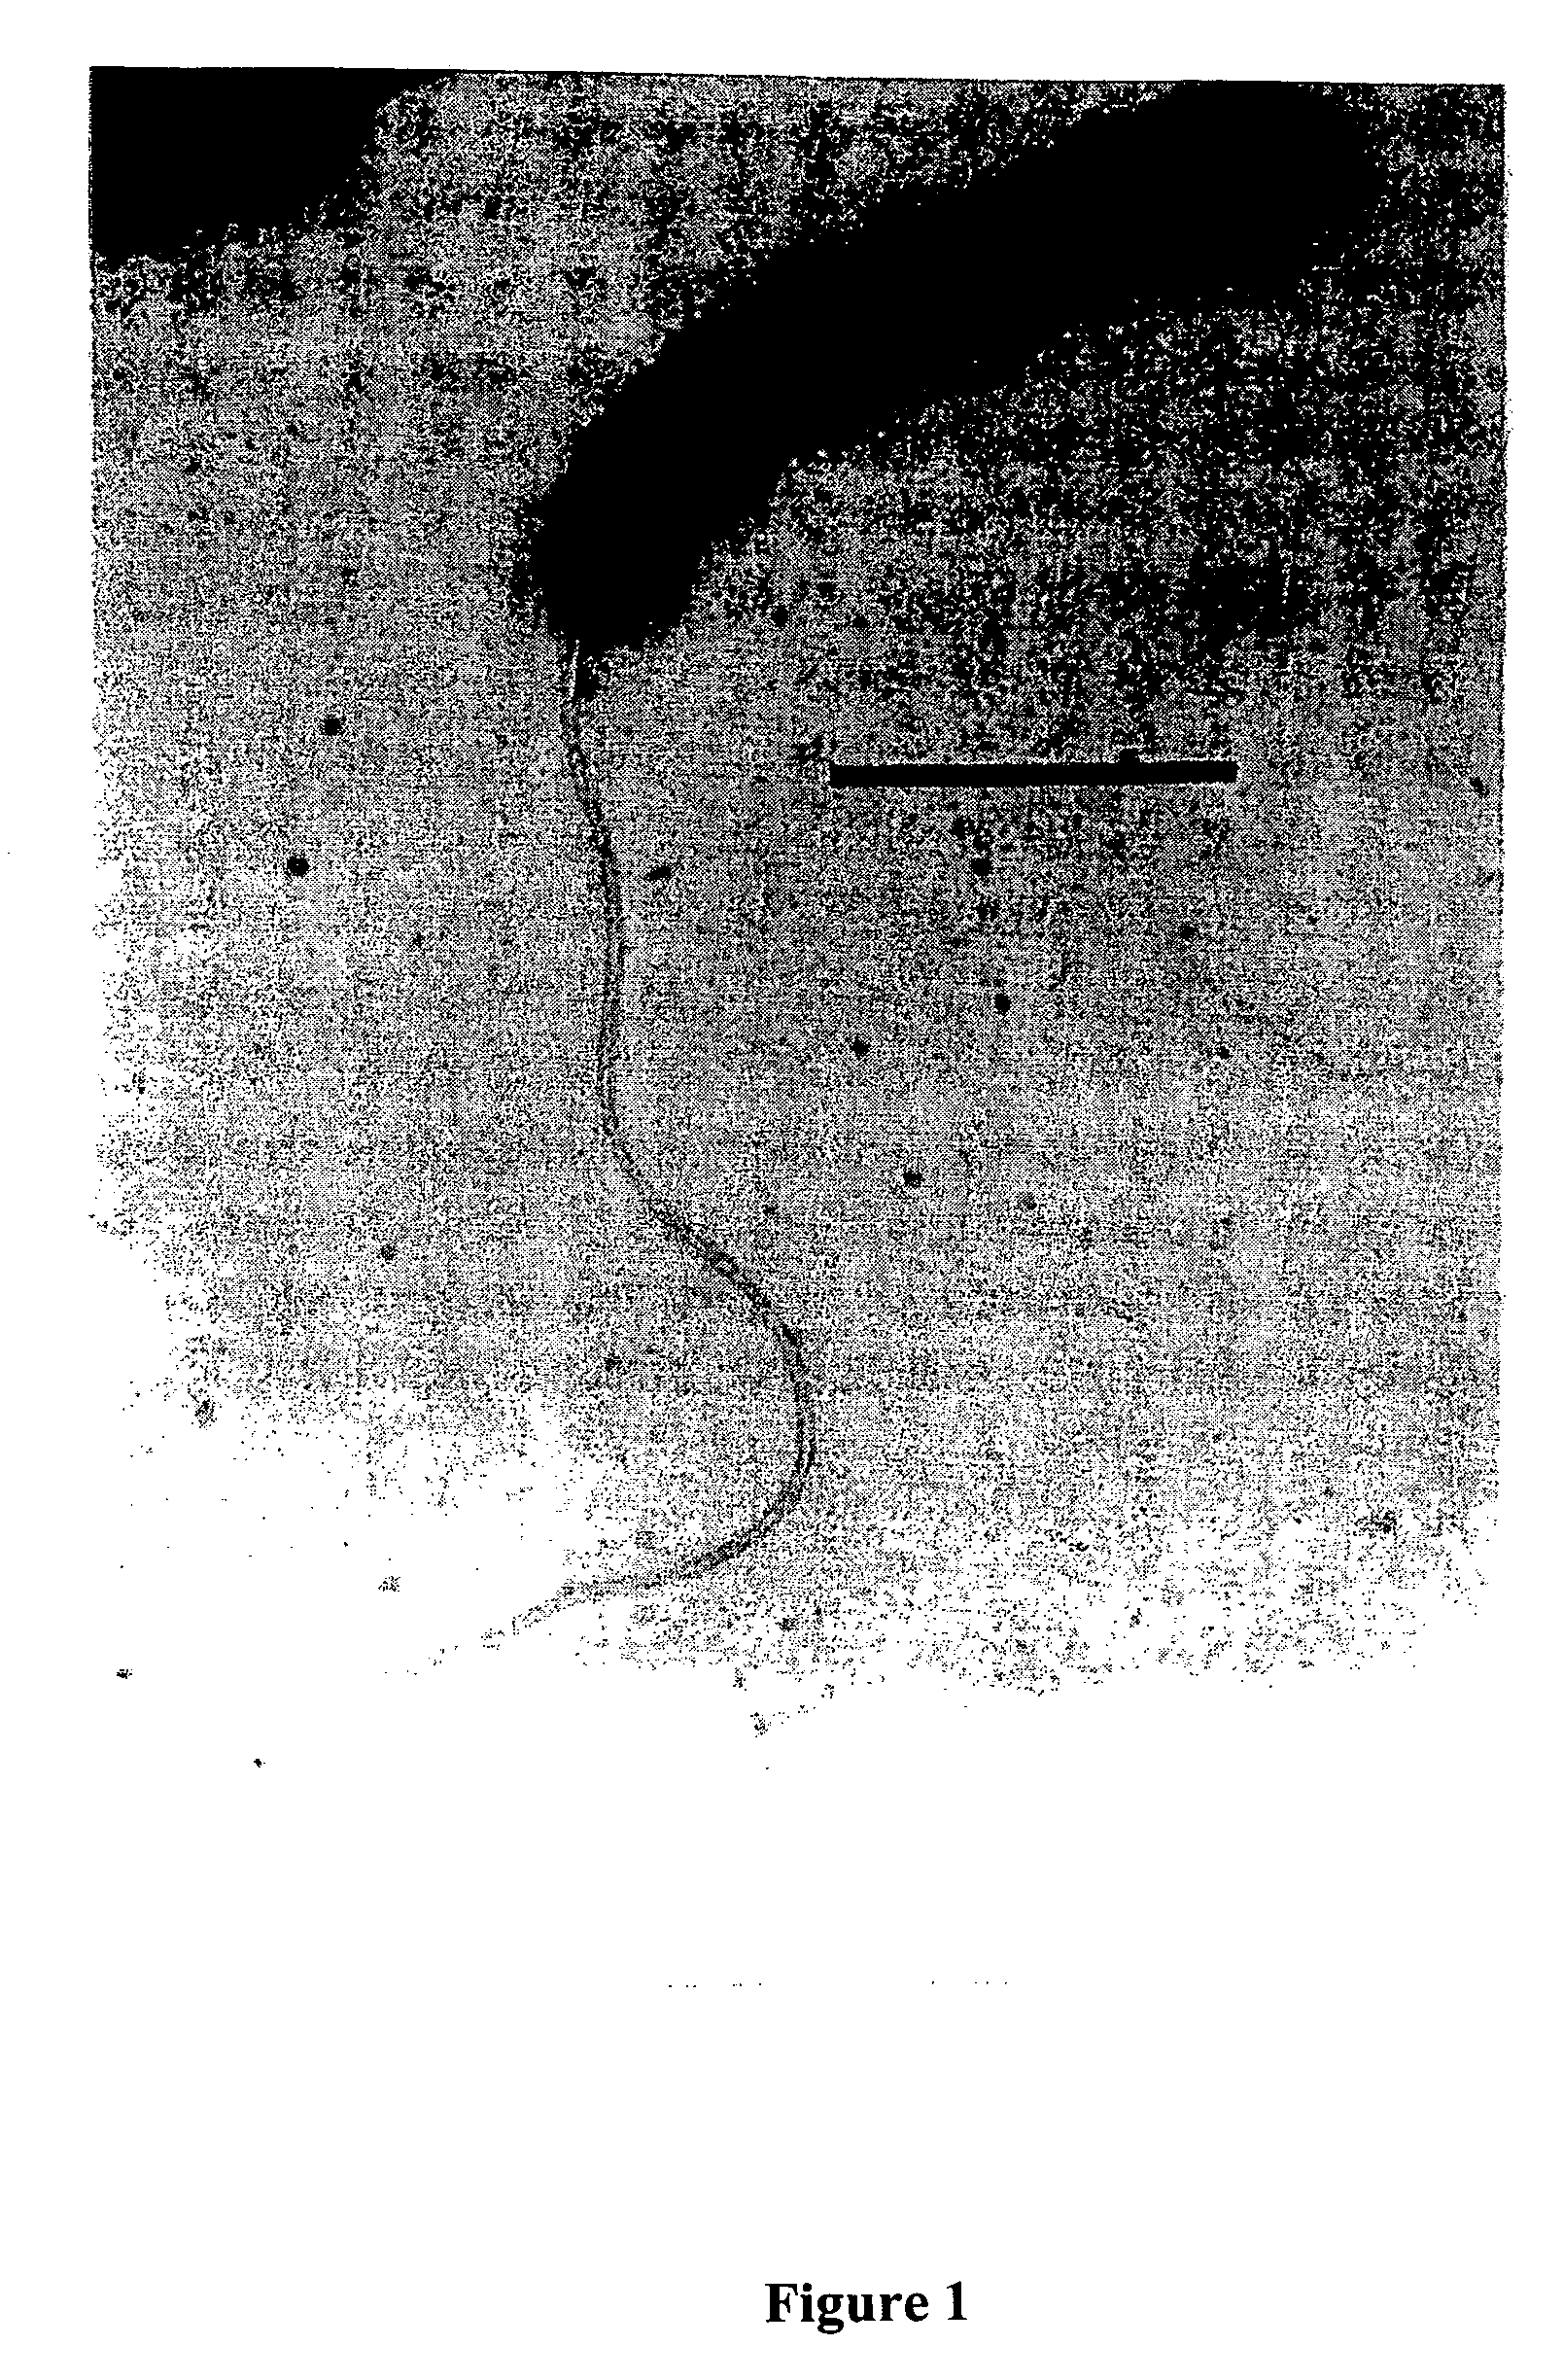 Alginases, systems containing alginases and methods of cloning, purifying and/or utilizing alginases